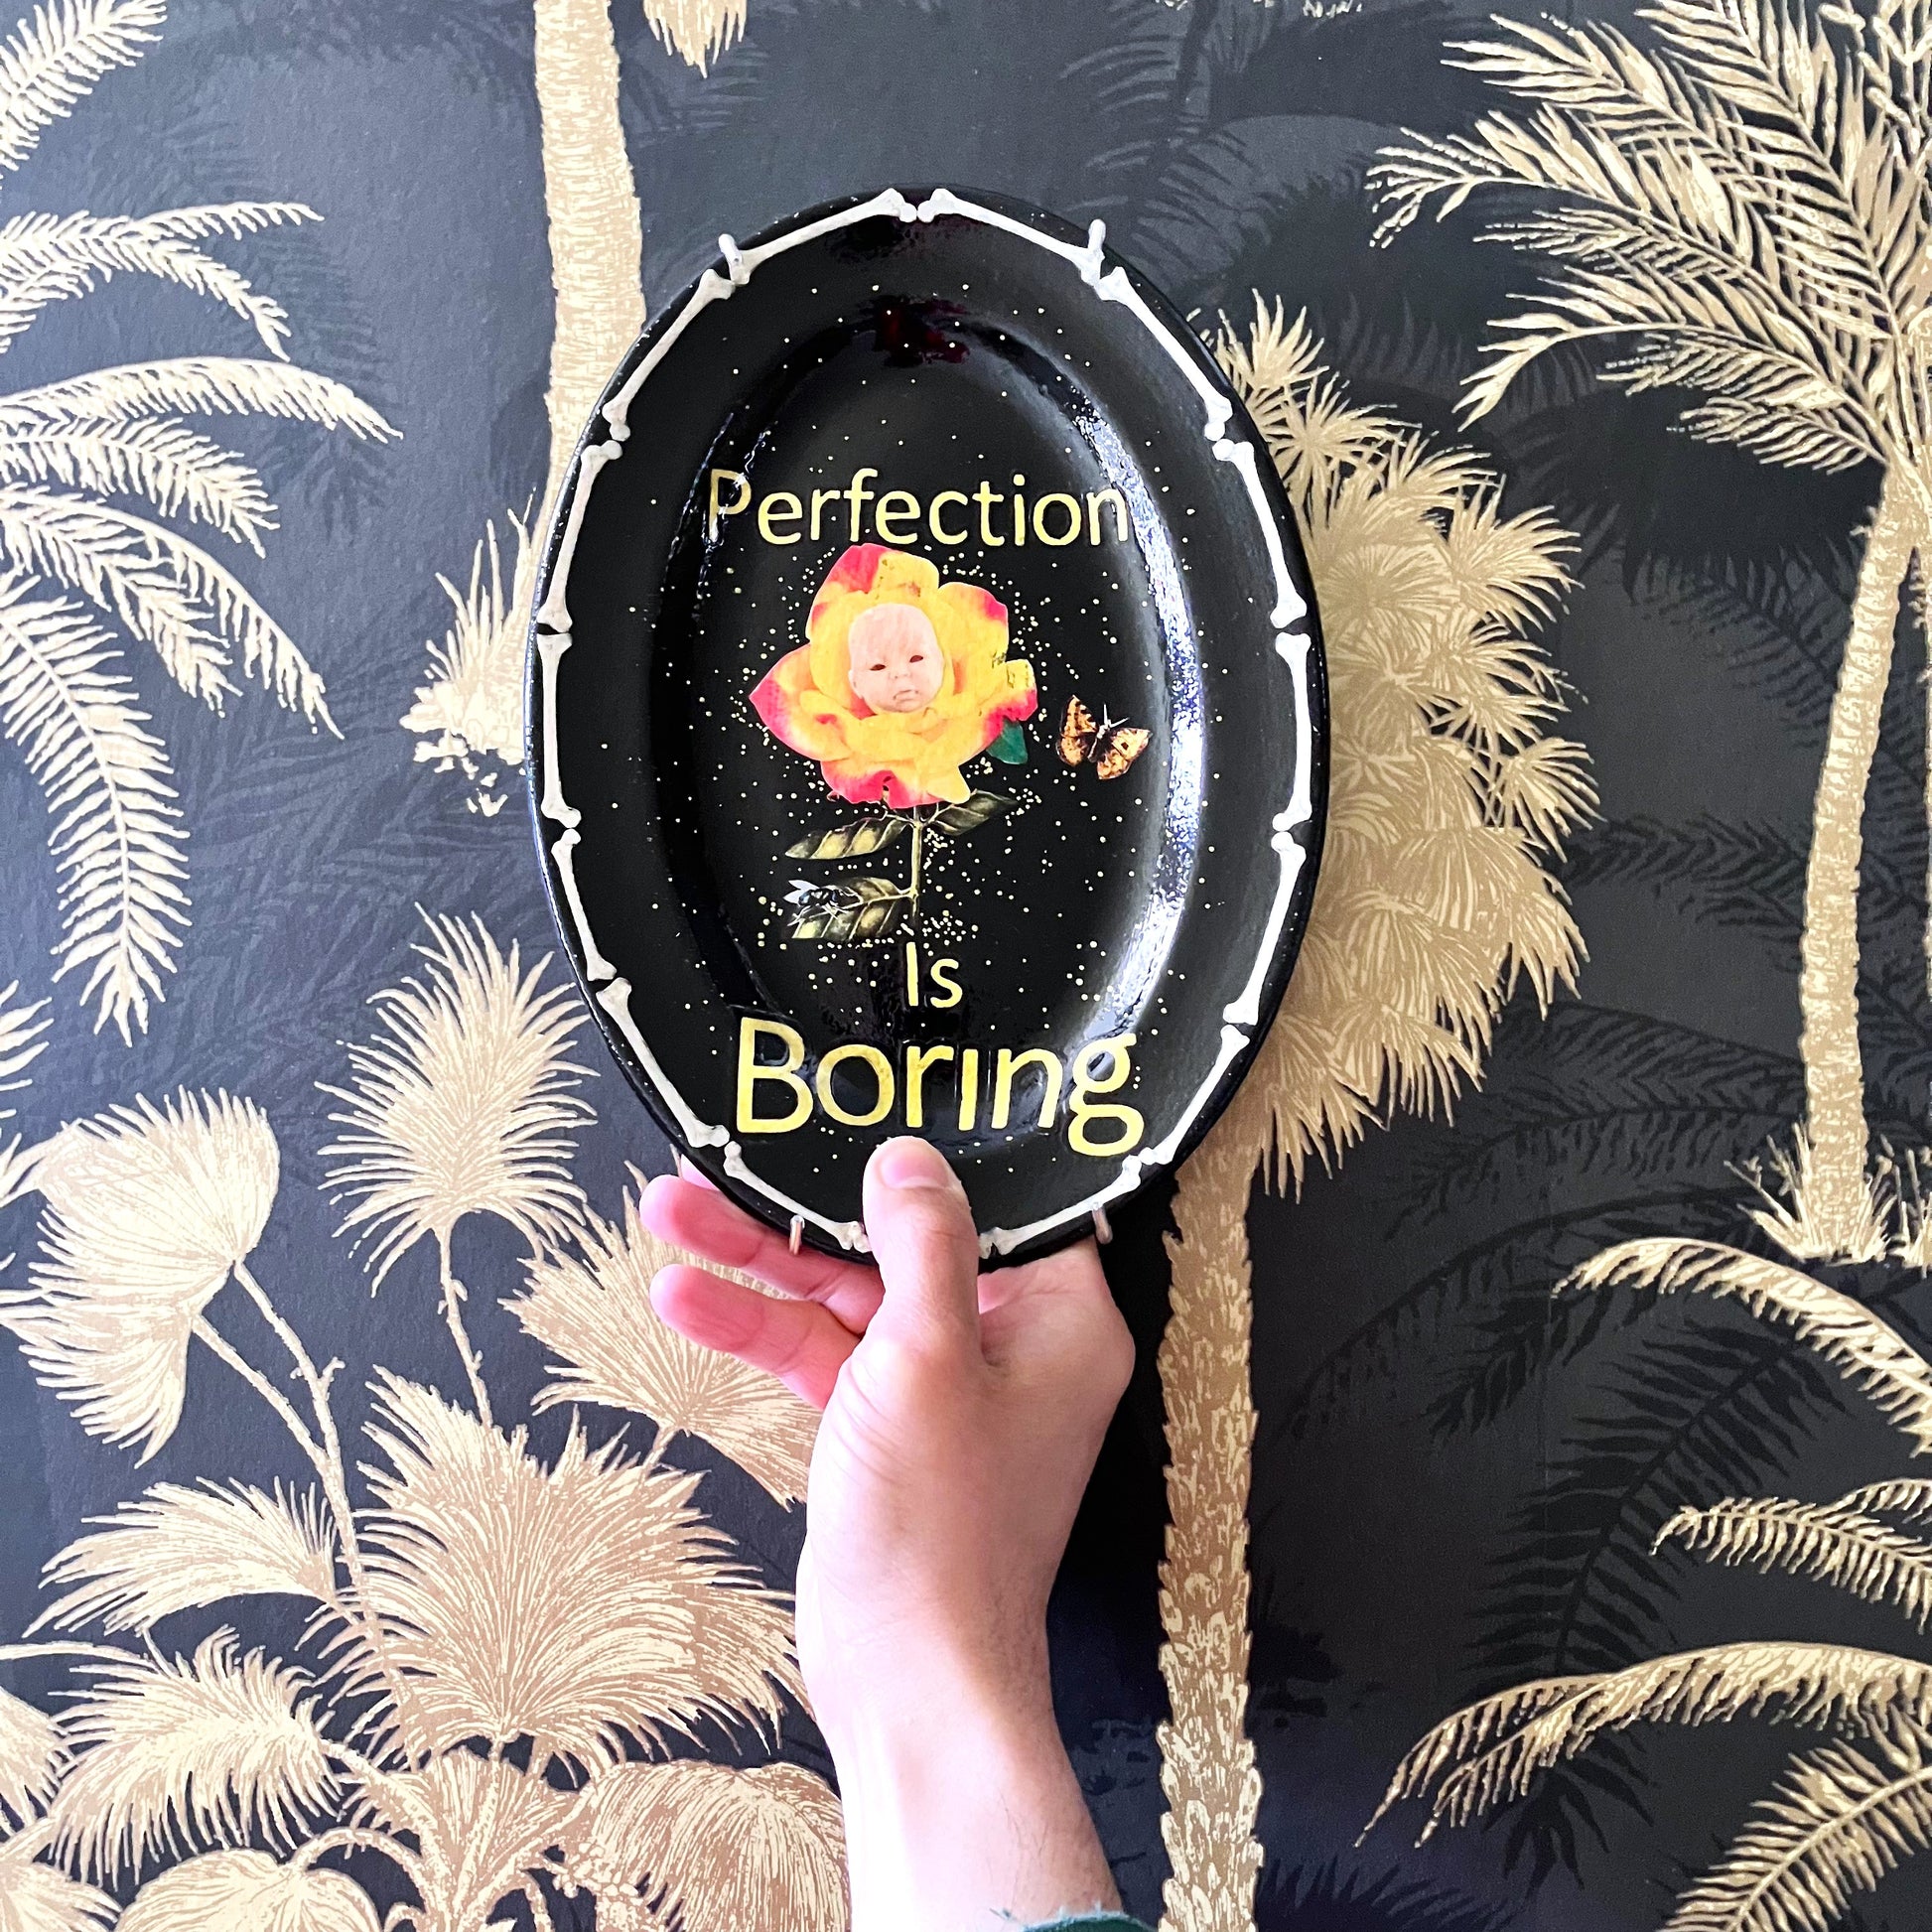 "Perfection Is Boring" Upcycled Wall Plate by House of Frisson, featuring a collage of a yellow rose with a doll face, a moth, and House of Frisson's fly, in a frame of bones. Closeup image showing someone holding the plate.